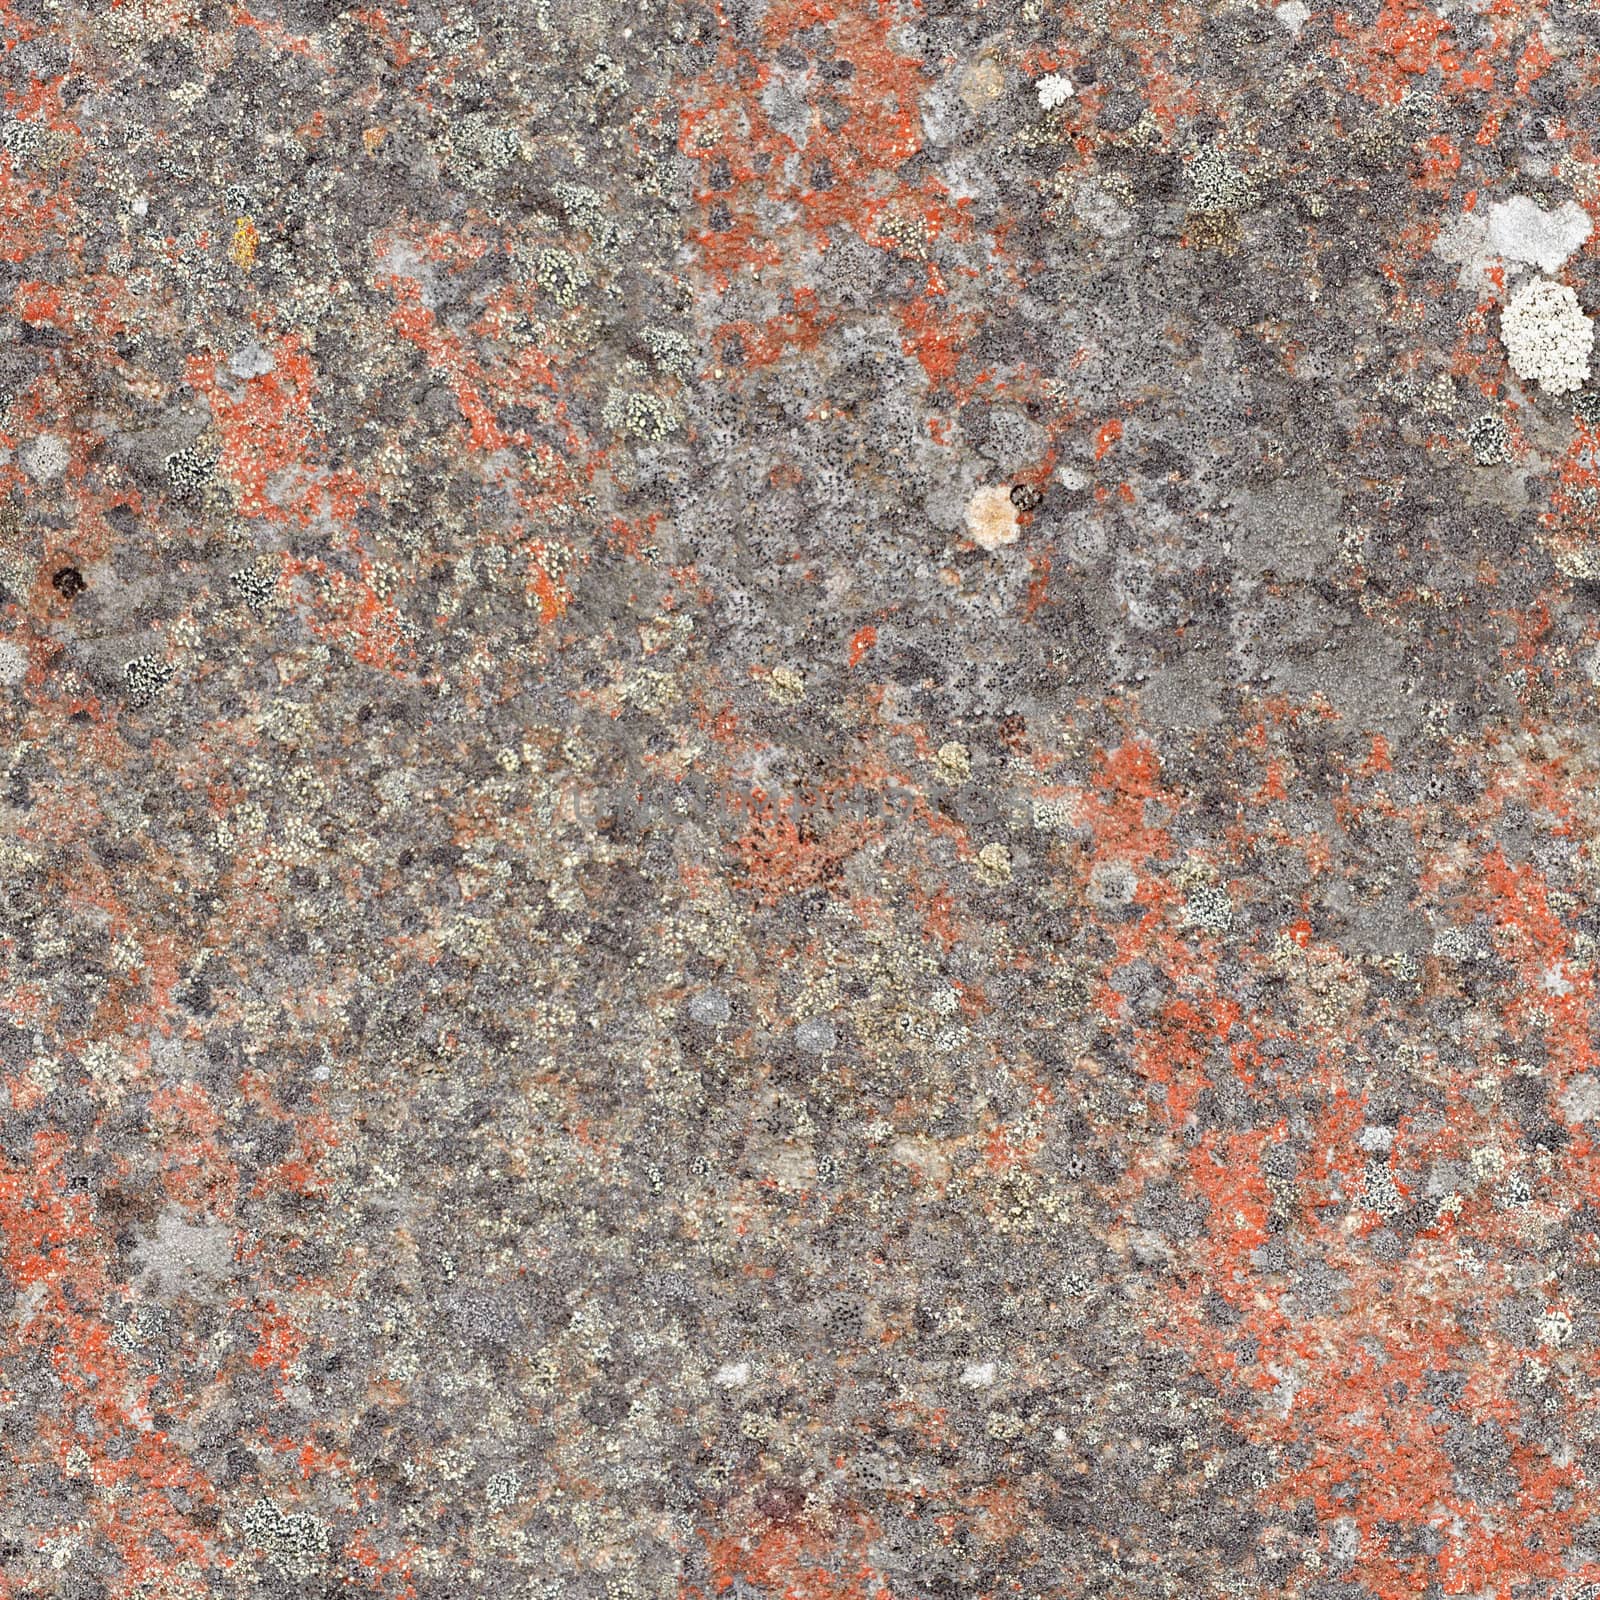 Seamless texture - the surface rock with lichen